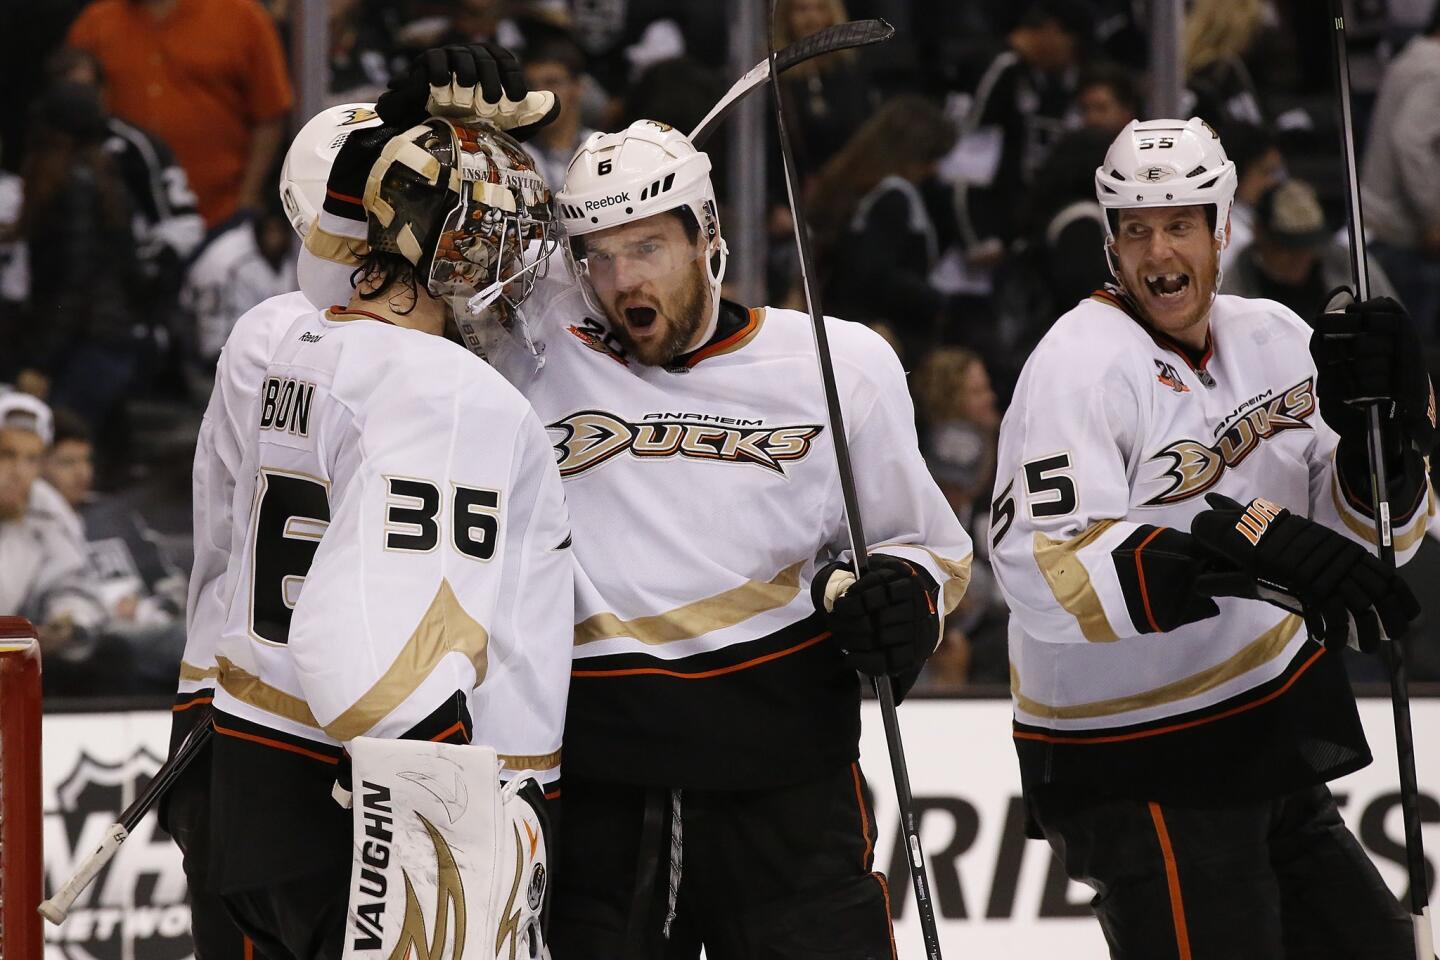 Ducks defensemen Ben Lovejoy and Bryan Allen (55) congratulate rookie goaltender John Gibson (36) after he shut out the Kings in Game 4 of their playoff series on Saturday night at Staples Center.